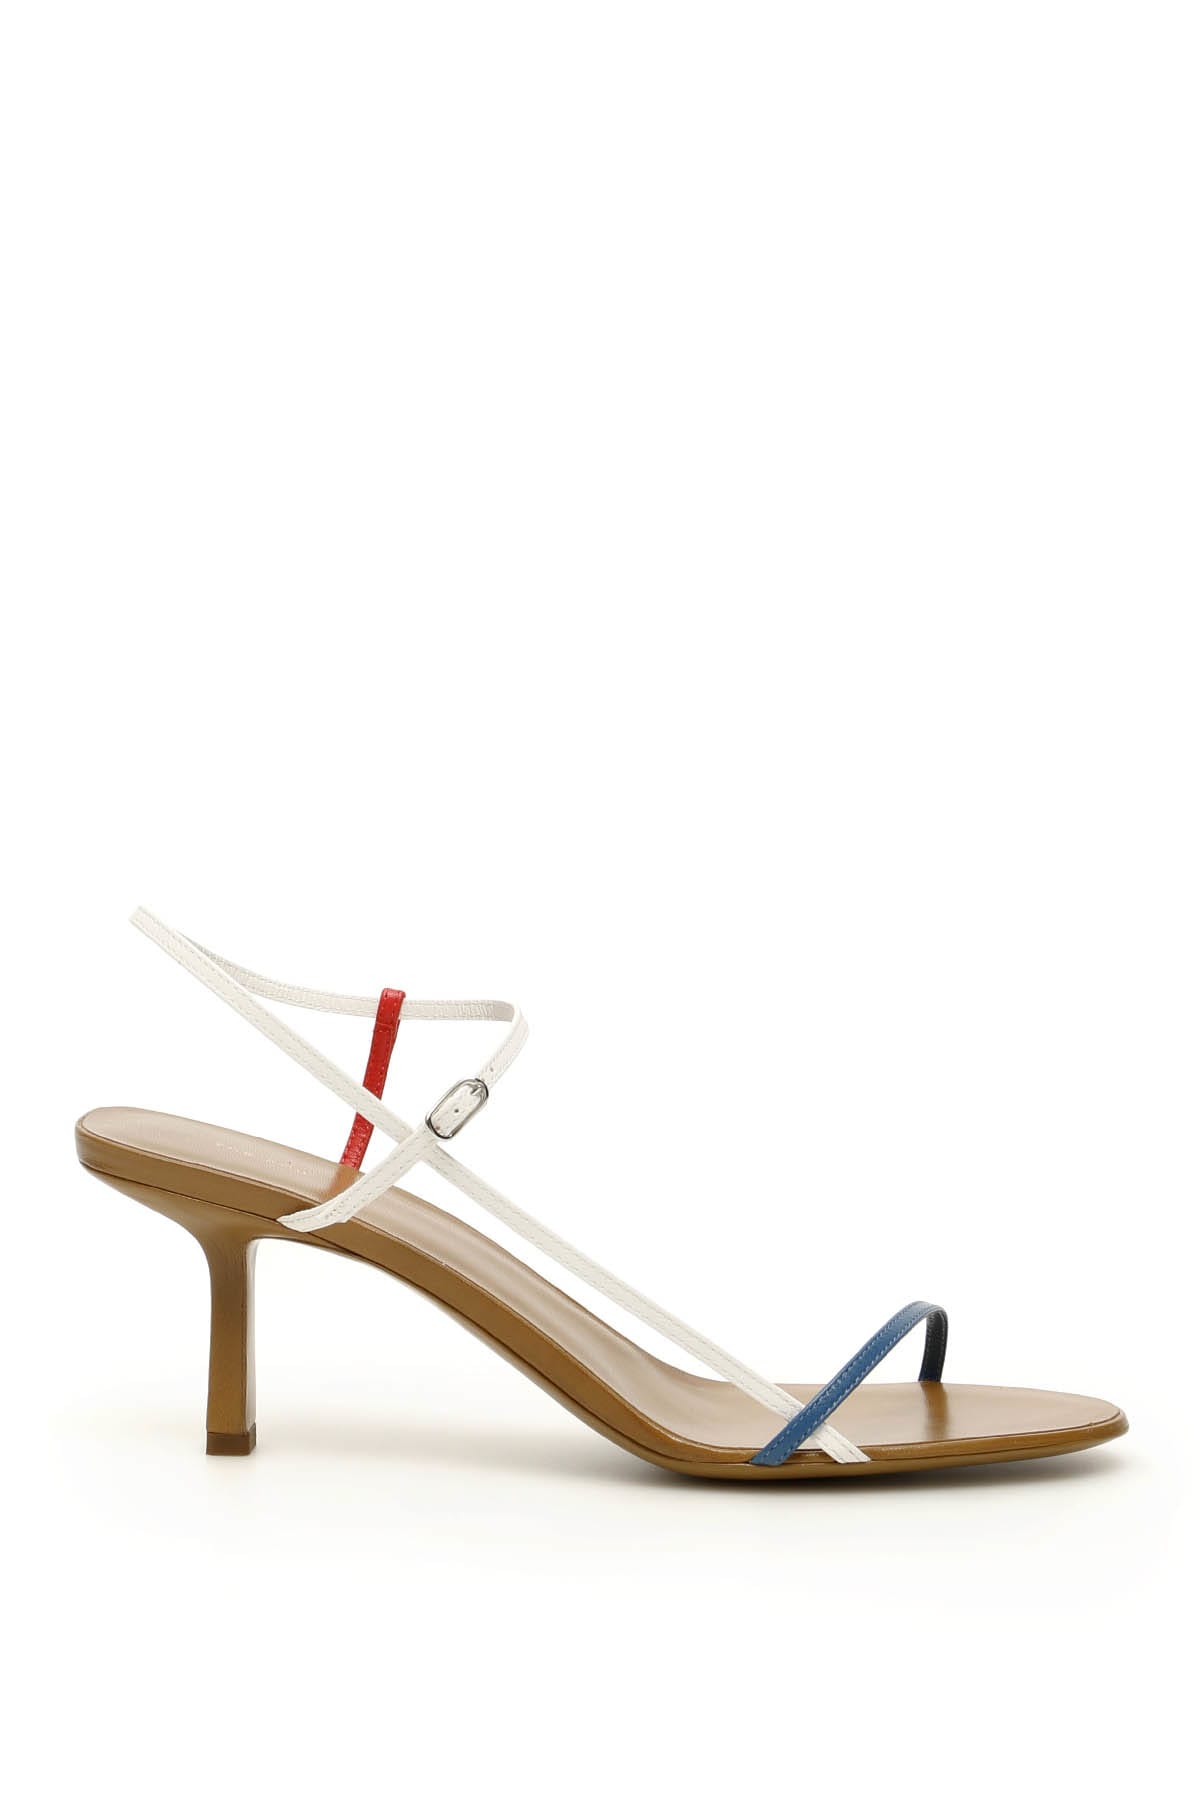 THE ROW BARE SANDALS 65,11243556